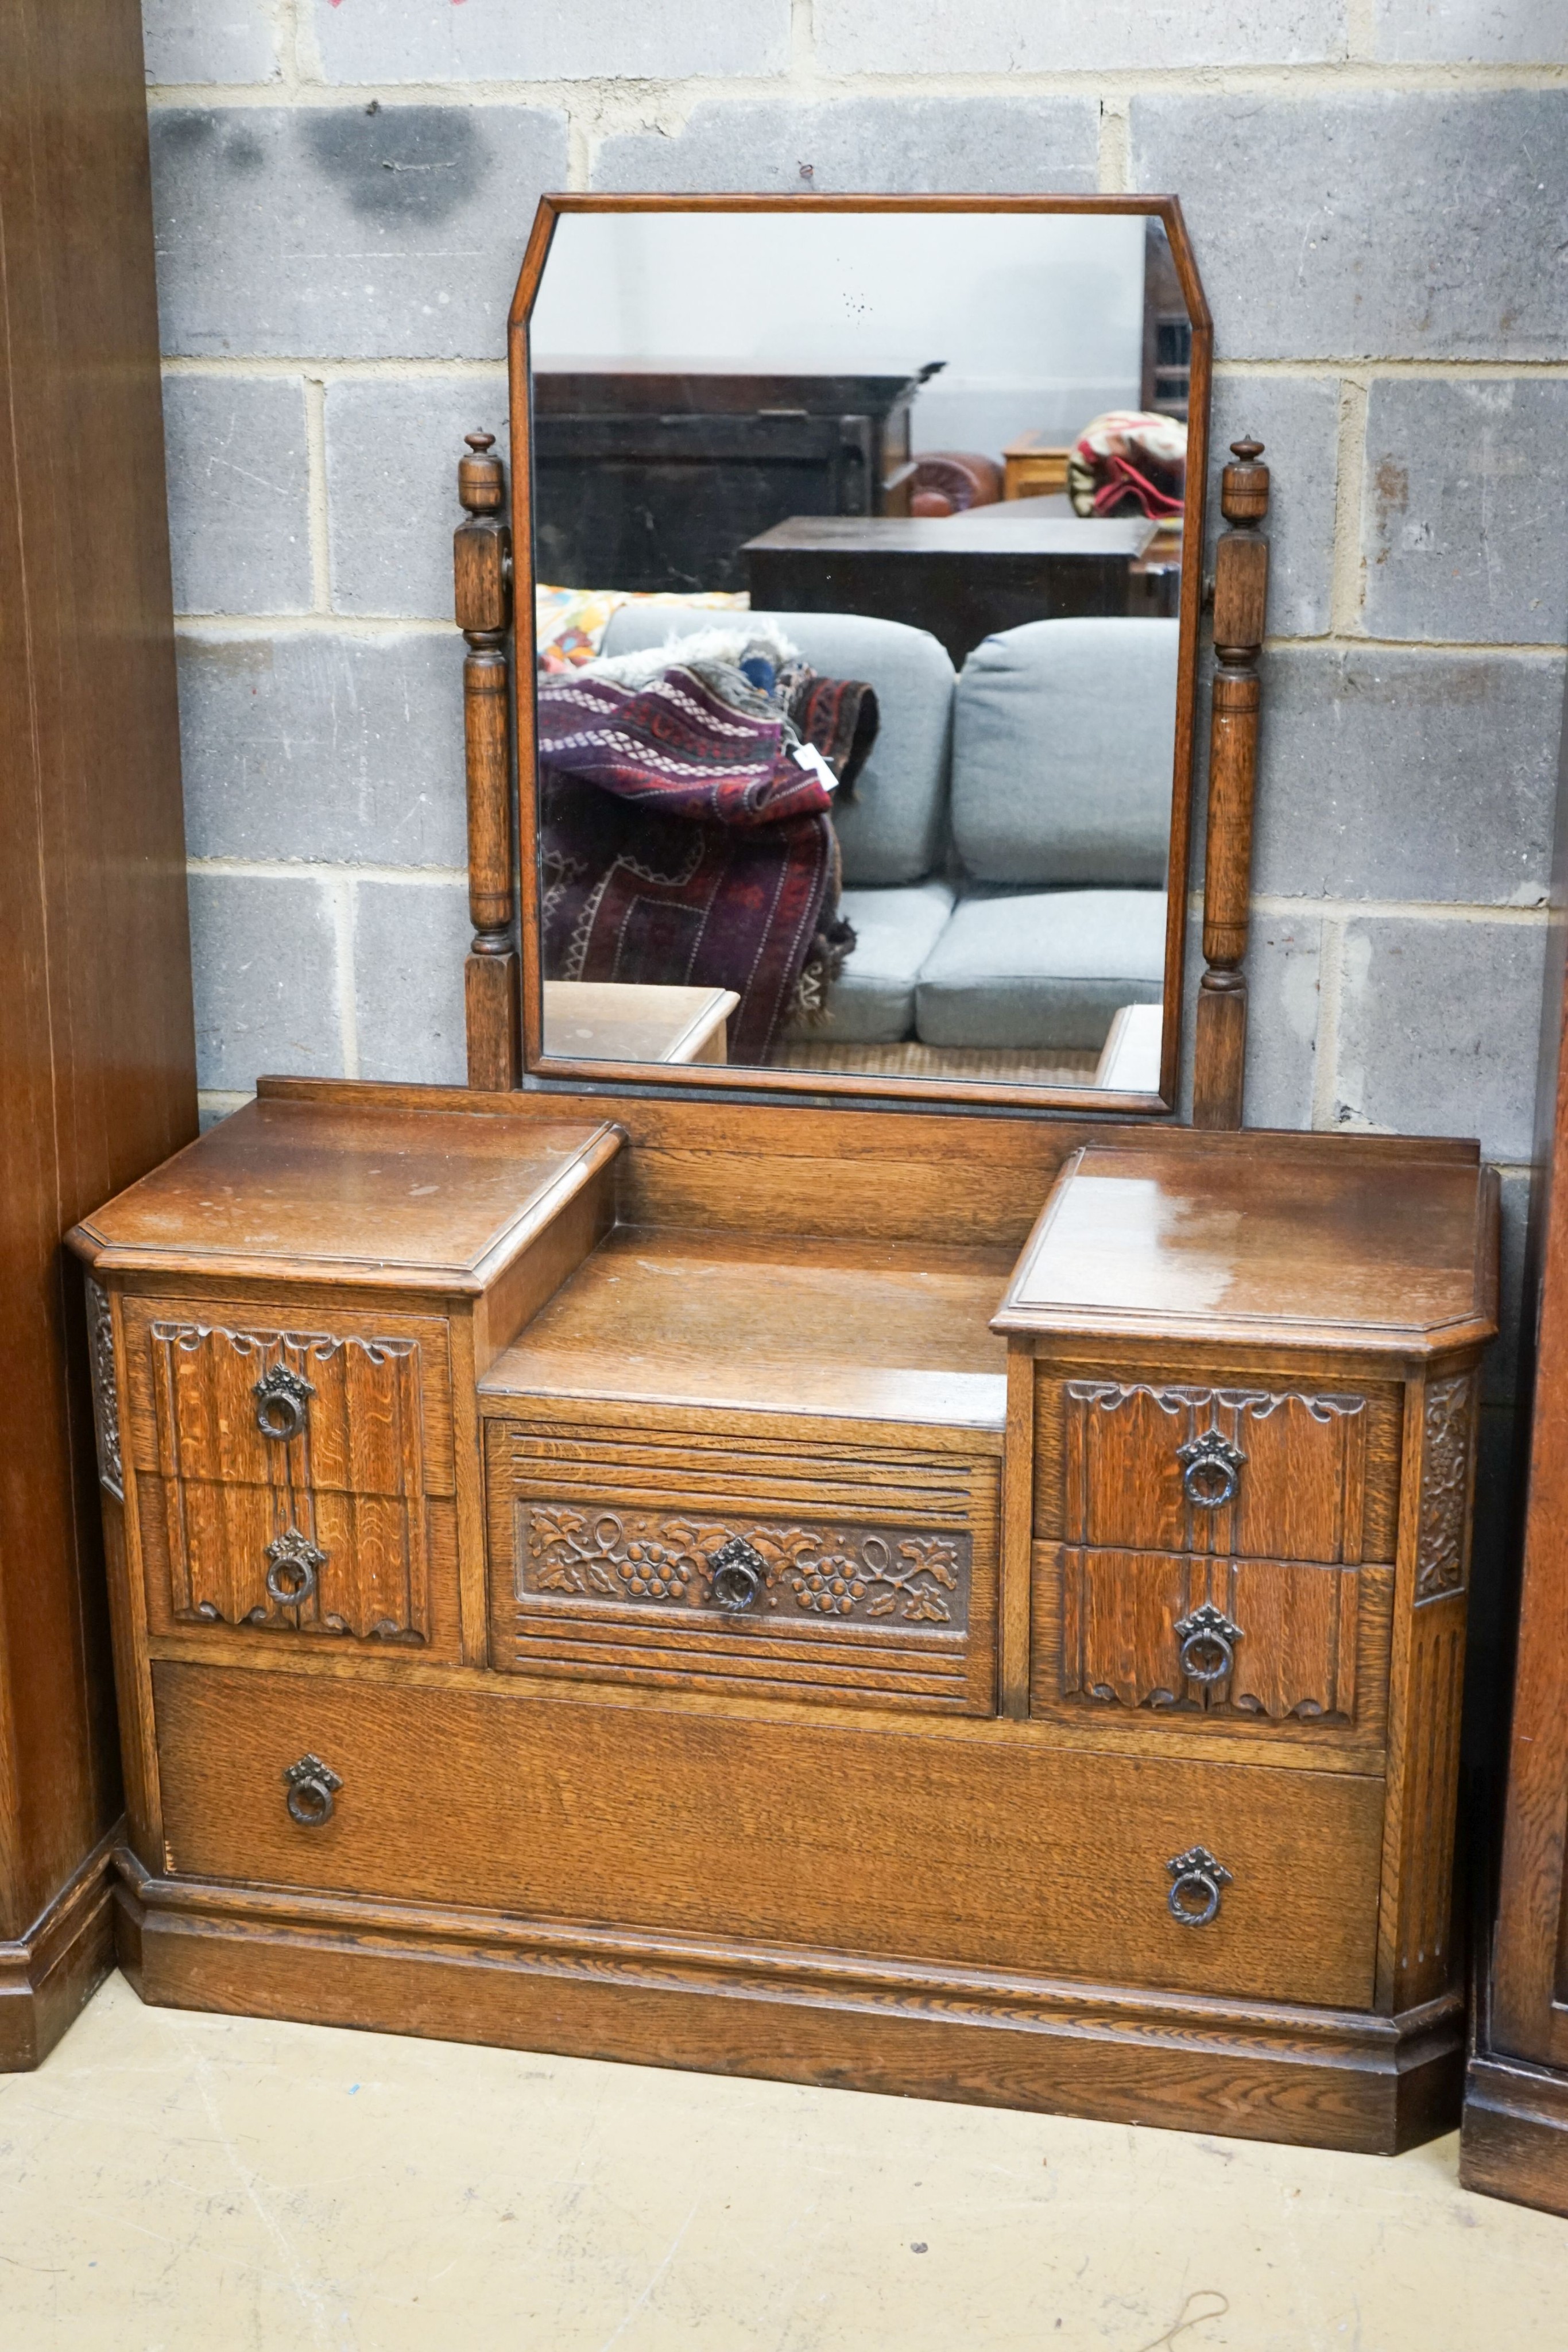 An early 20th century Jacobean revival linenfold moulded oak three piece bedroom suite, larger wardrobe length 128cm, depth 58cm, height 183cm